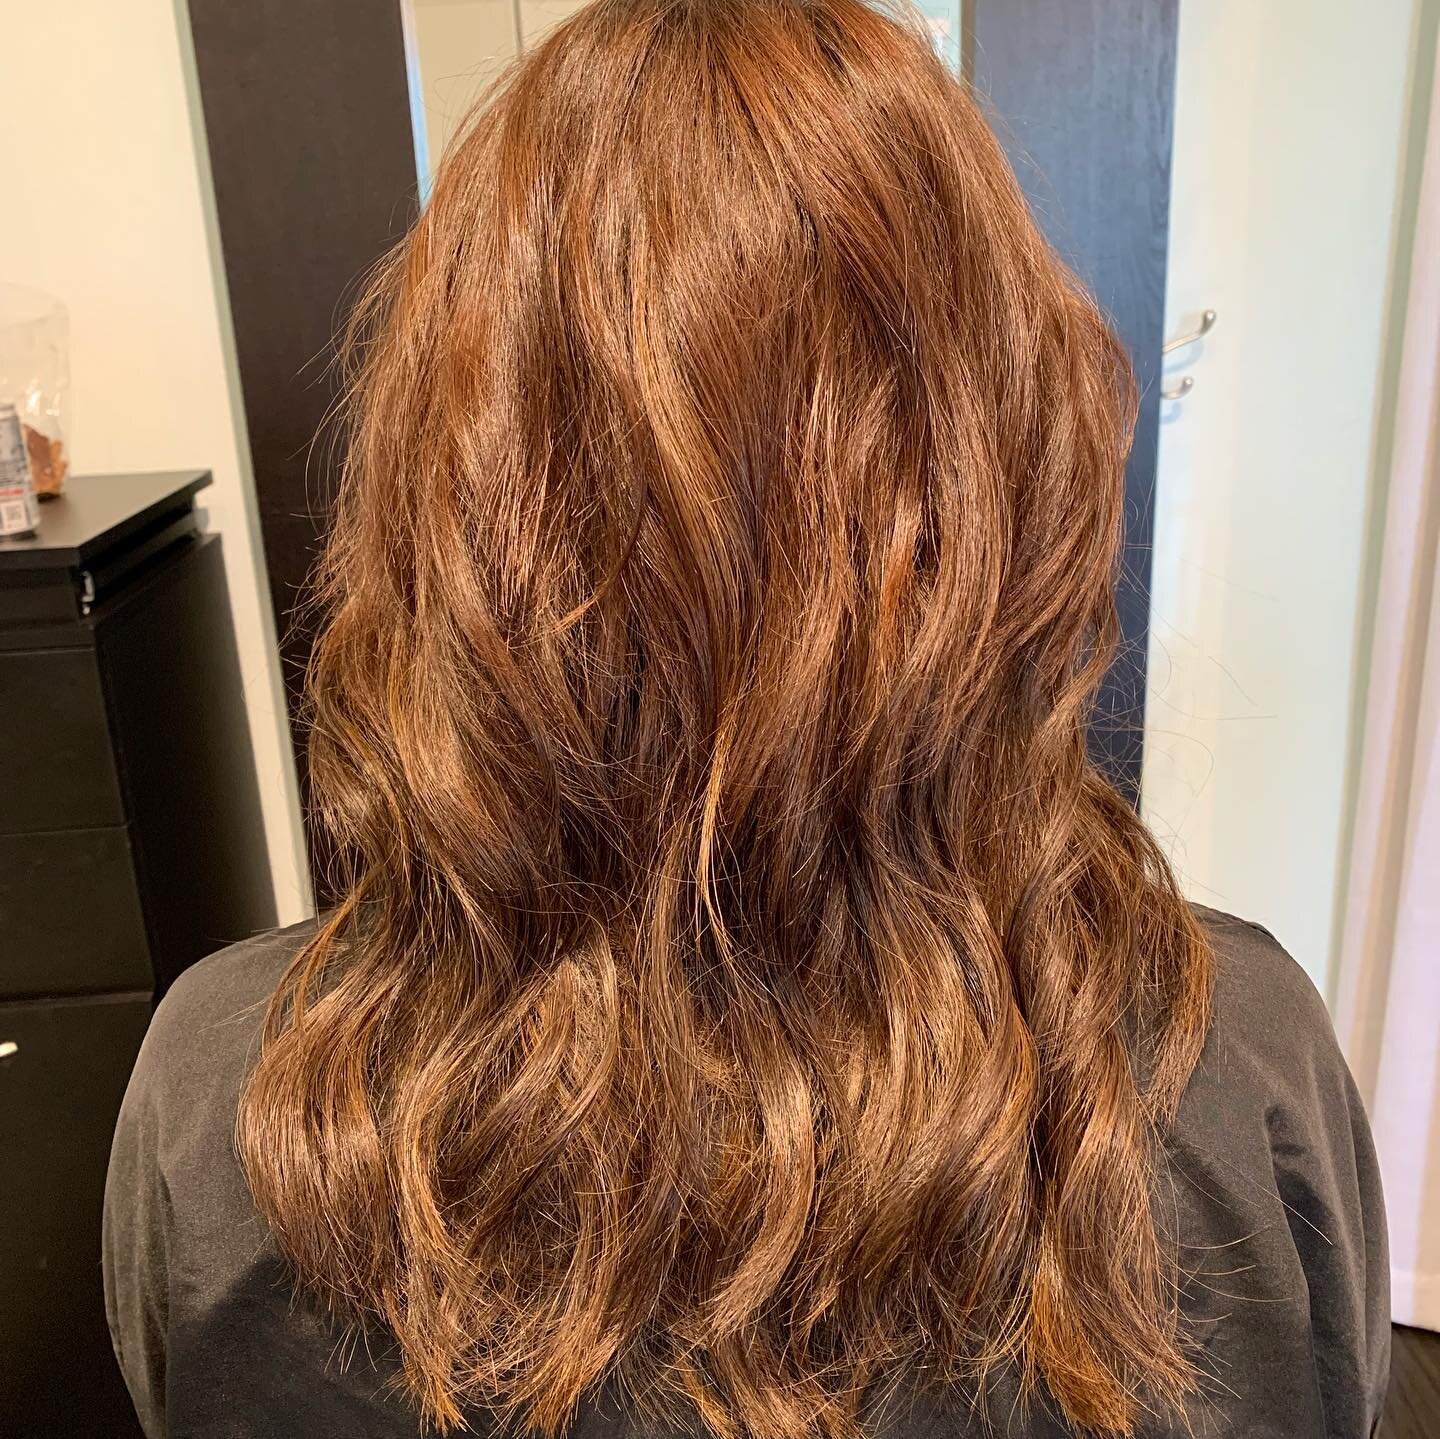 #greatlengths 3 bundles to help this beauty with her grow out. Extensions are a game changer! They take years off any woman with fine hair. #betterthanbotox .
.
#greatlengthsusa #extensions #beforeandafter #austinstylist #austinhairstylist